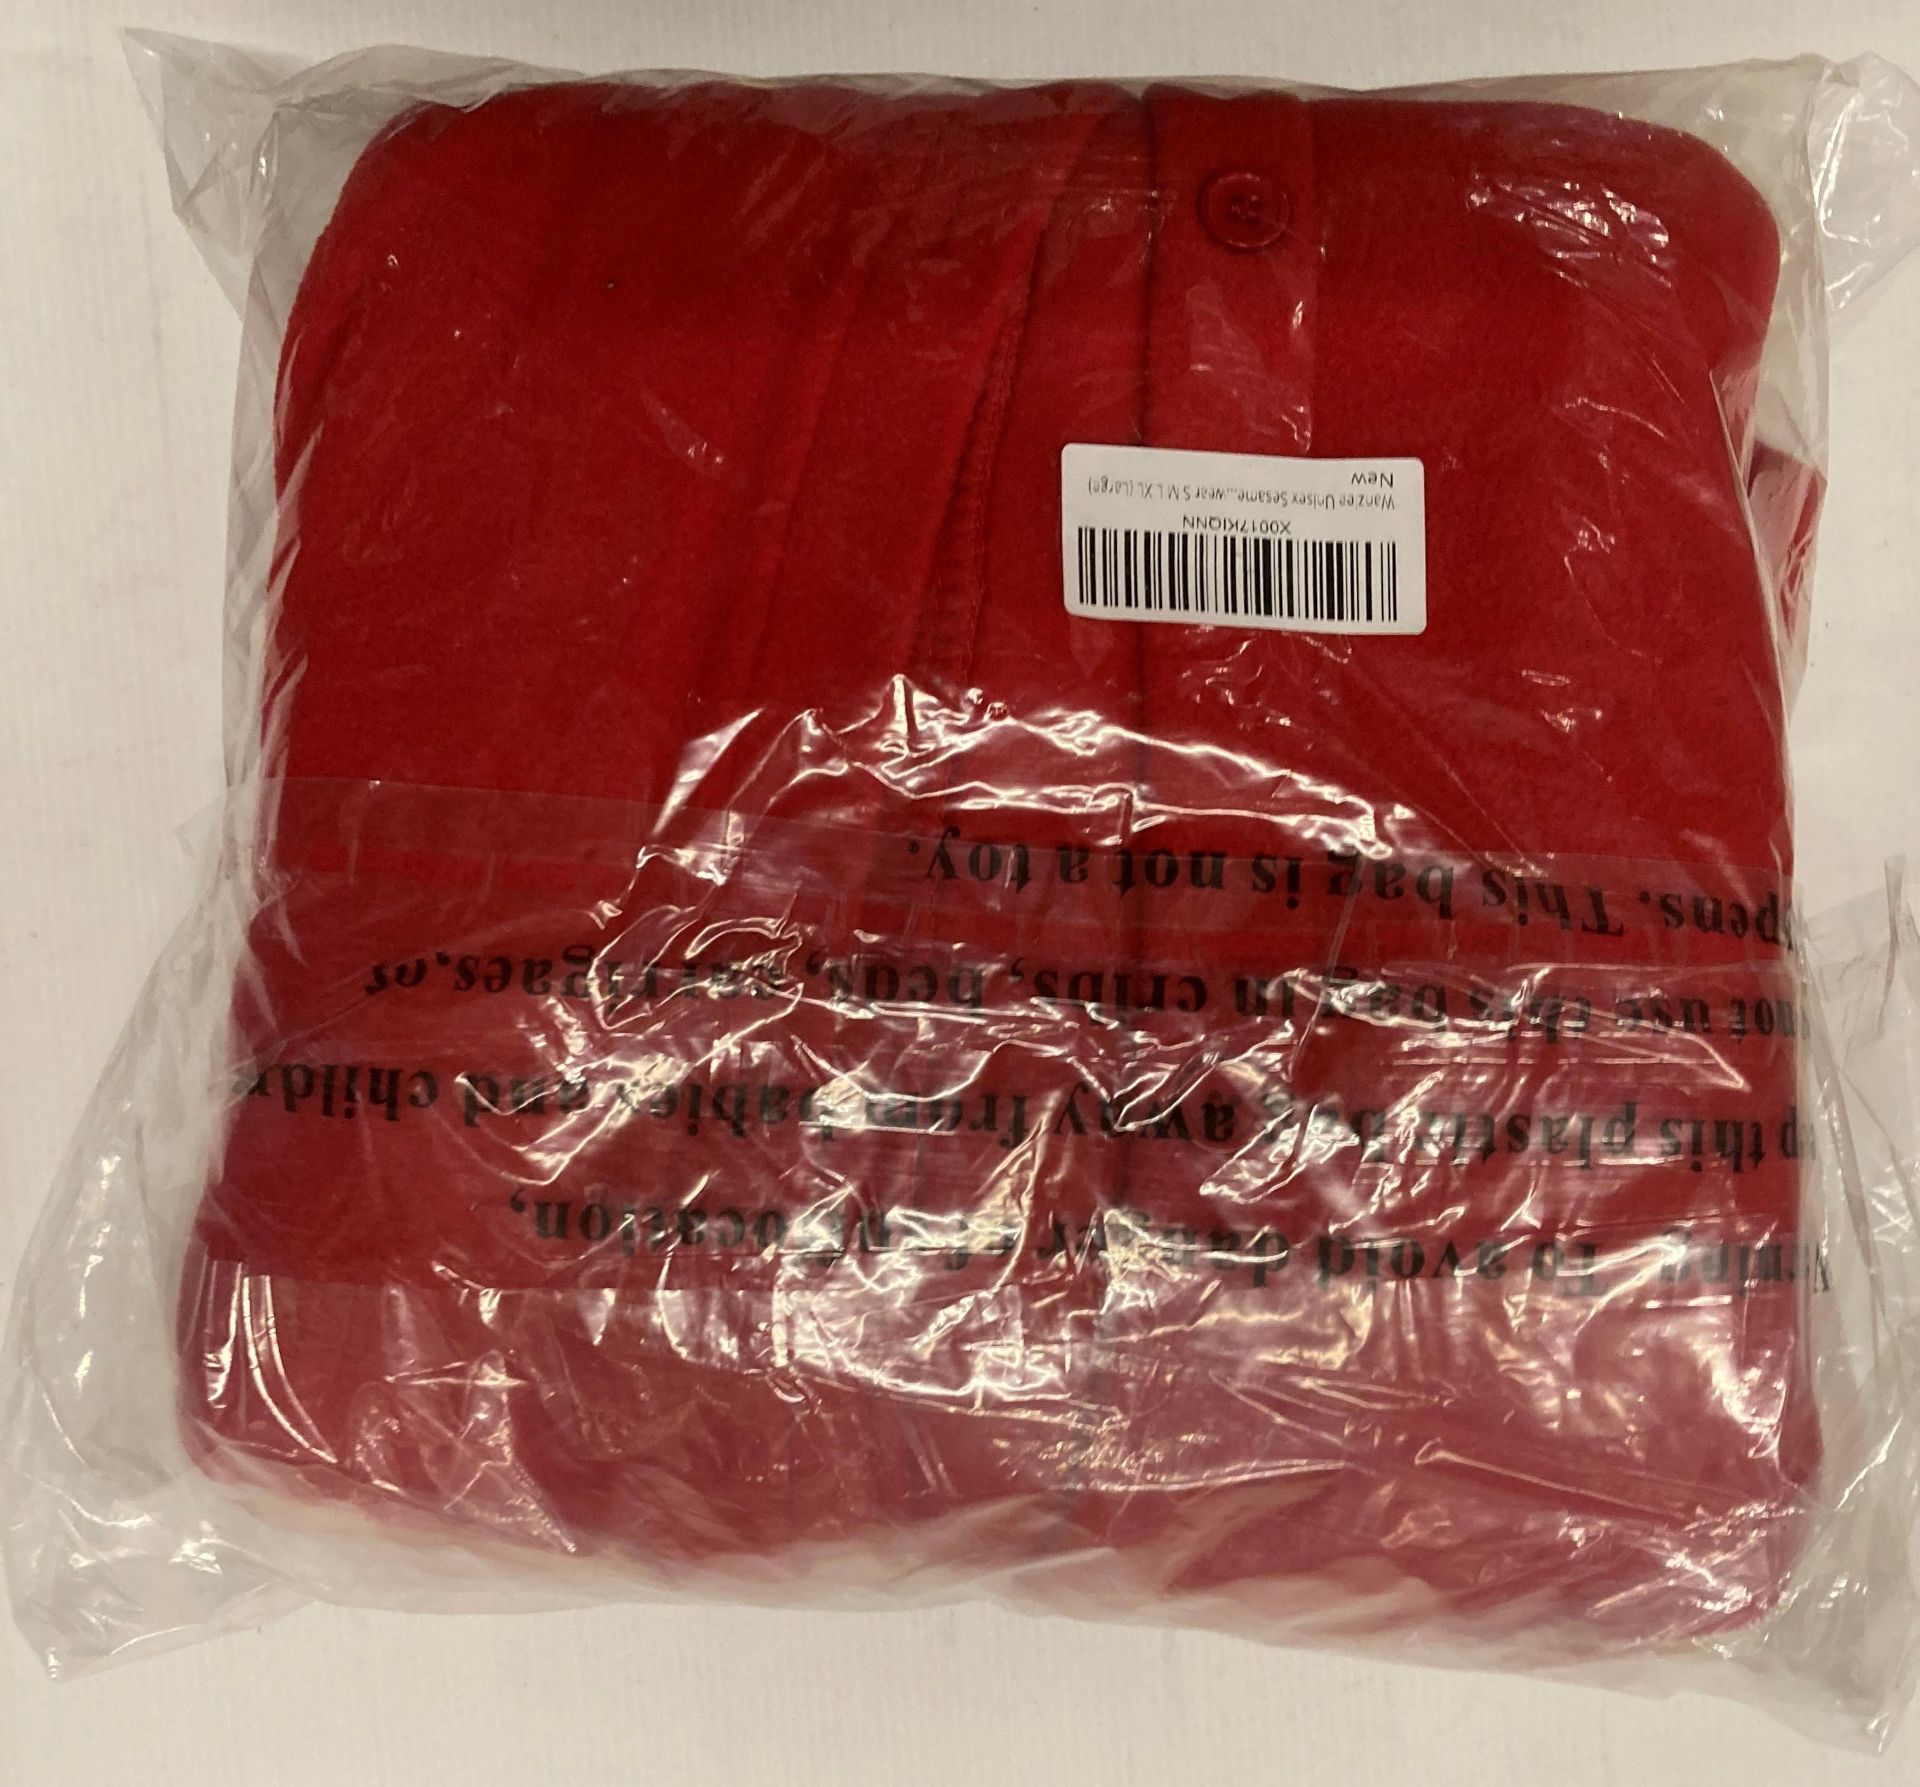 10 x assorted size red Elmo onesies by Wanziee (saleroom location: L05 floor) Further - Image 2 of 2